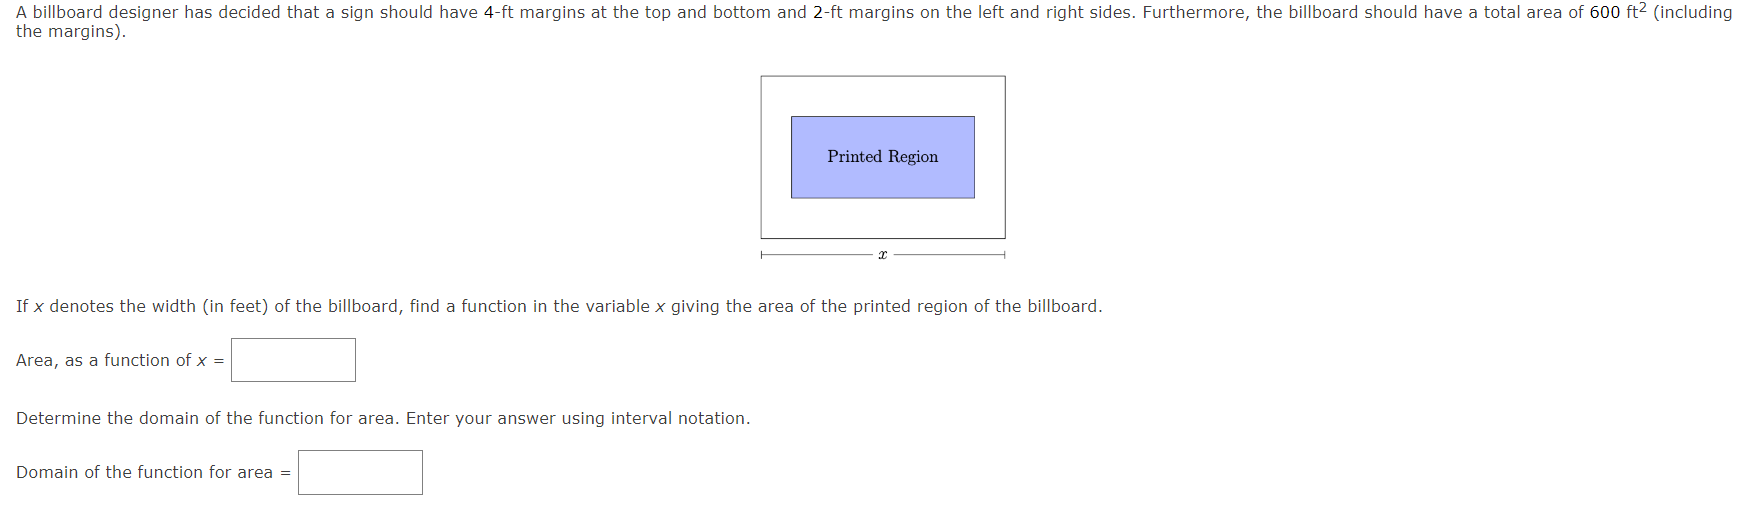 If \( x \) denotes the width (in feet) of the billboard, find a function in the variable \( x \) giving the area of the print